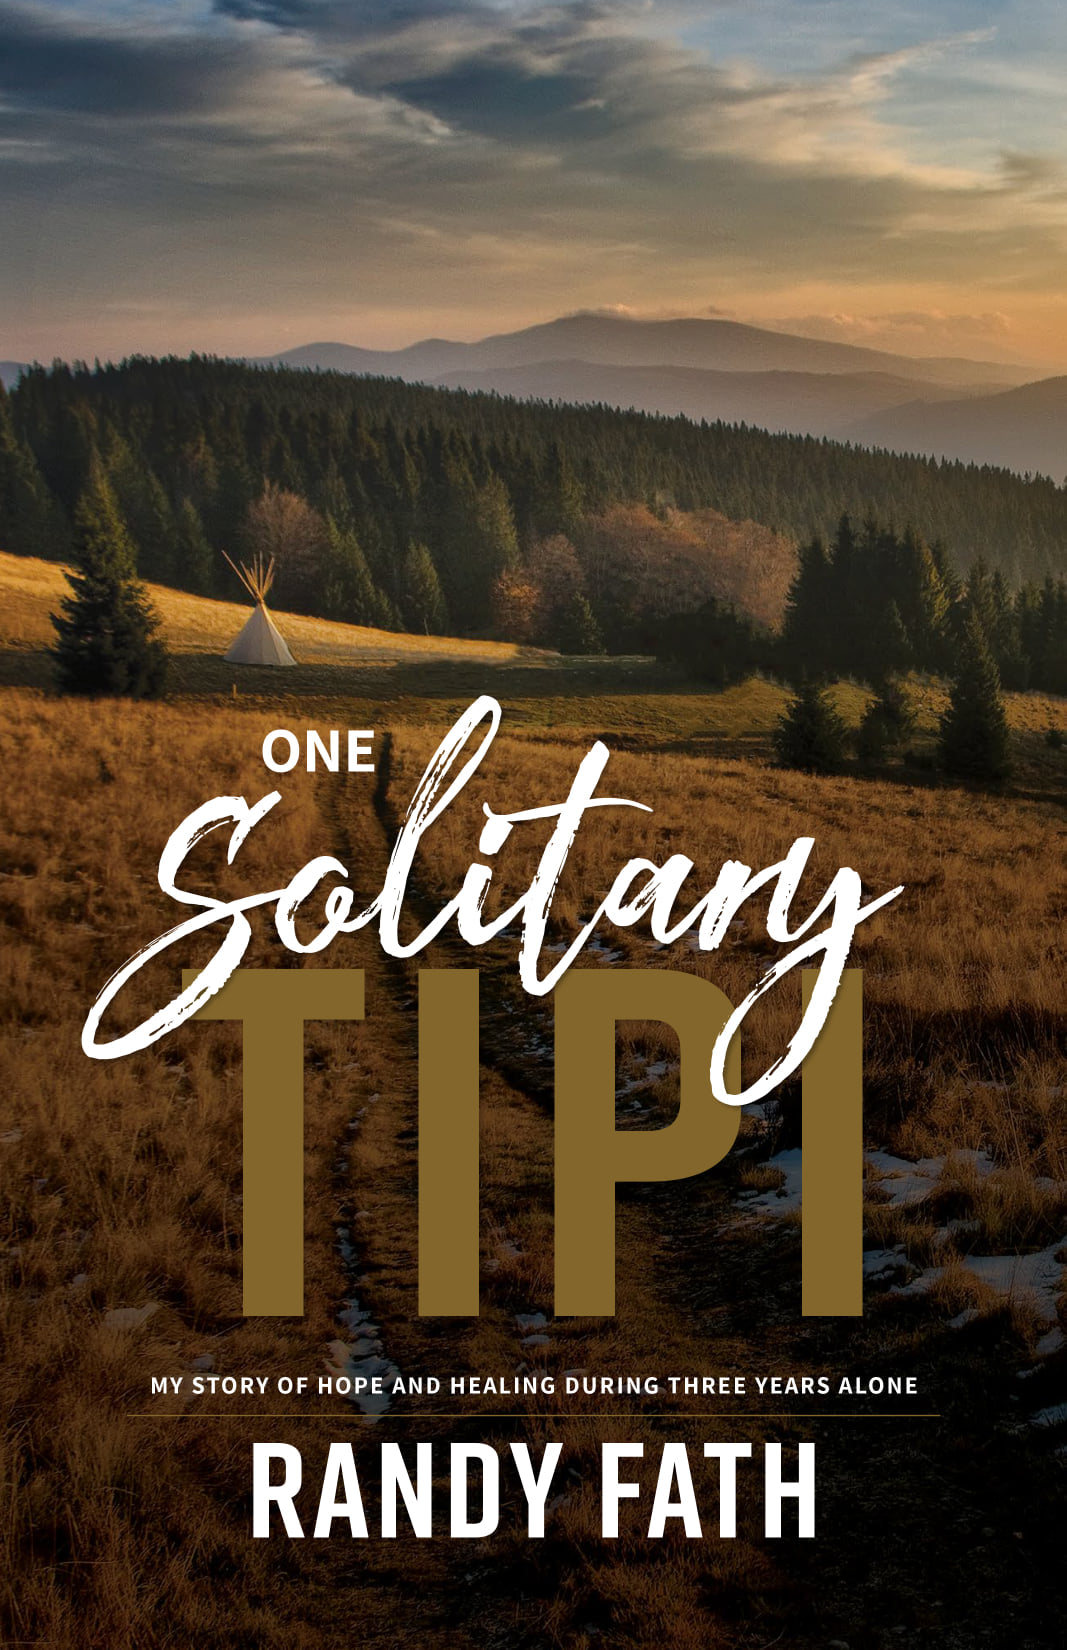 One Solitary Tipi: My Story of Hope and Healing During Three Years Alone